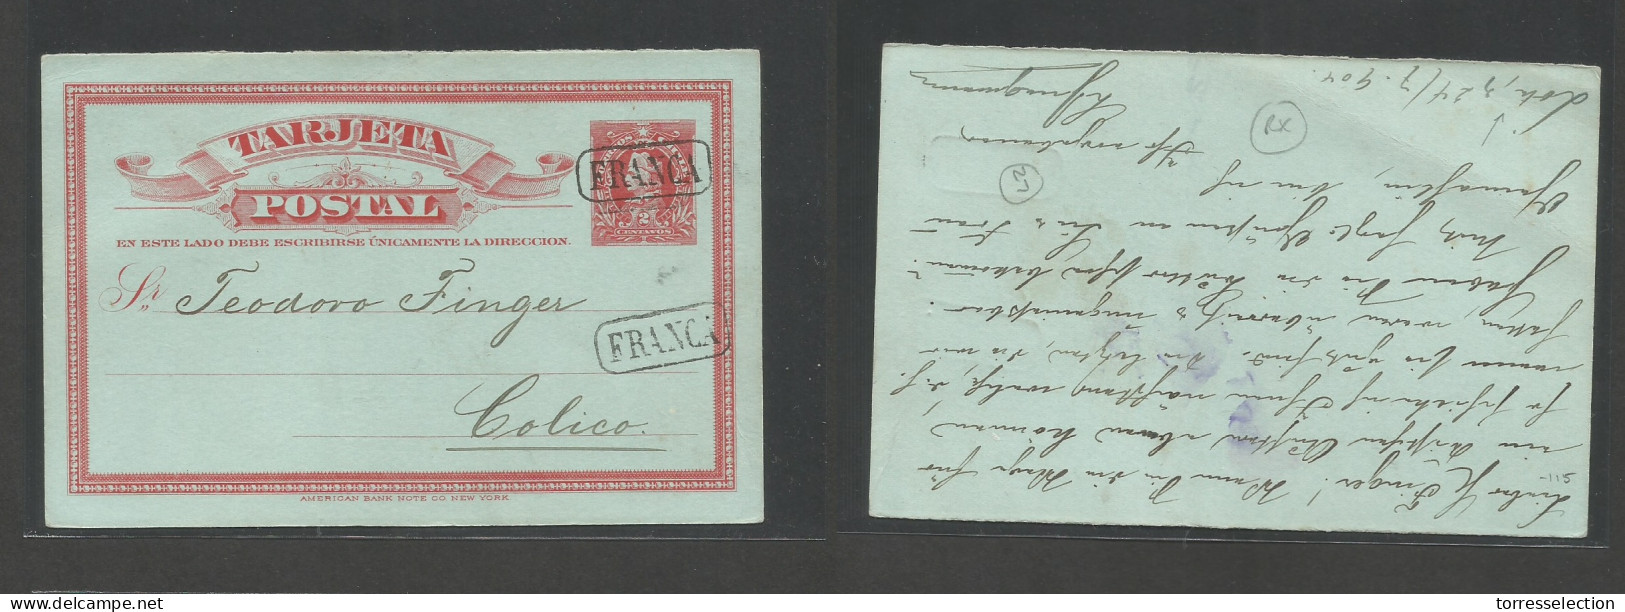 CHILE - Stationery. 1904 (24 July) Loti - Colico. Reply Half Doble 2c Red Stat Card, Way Out, Box "FRANCA" VF And Rare. - Cile